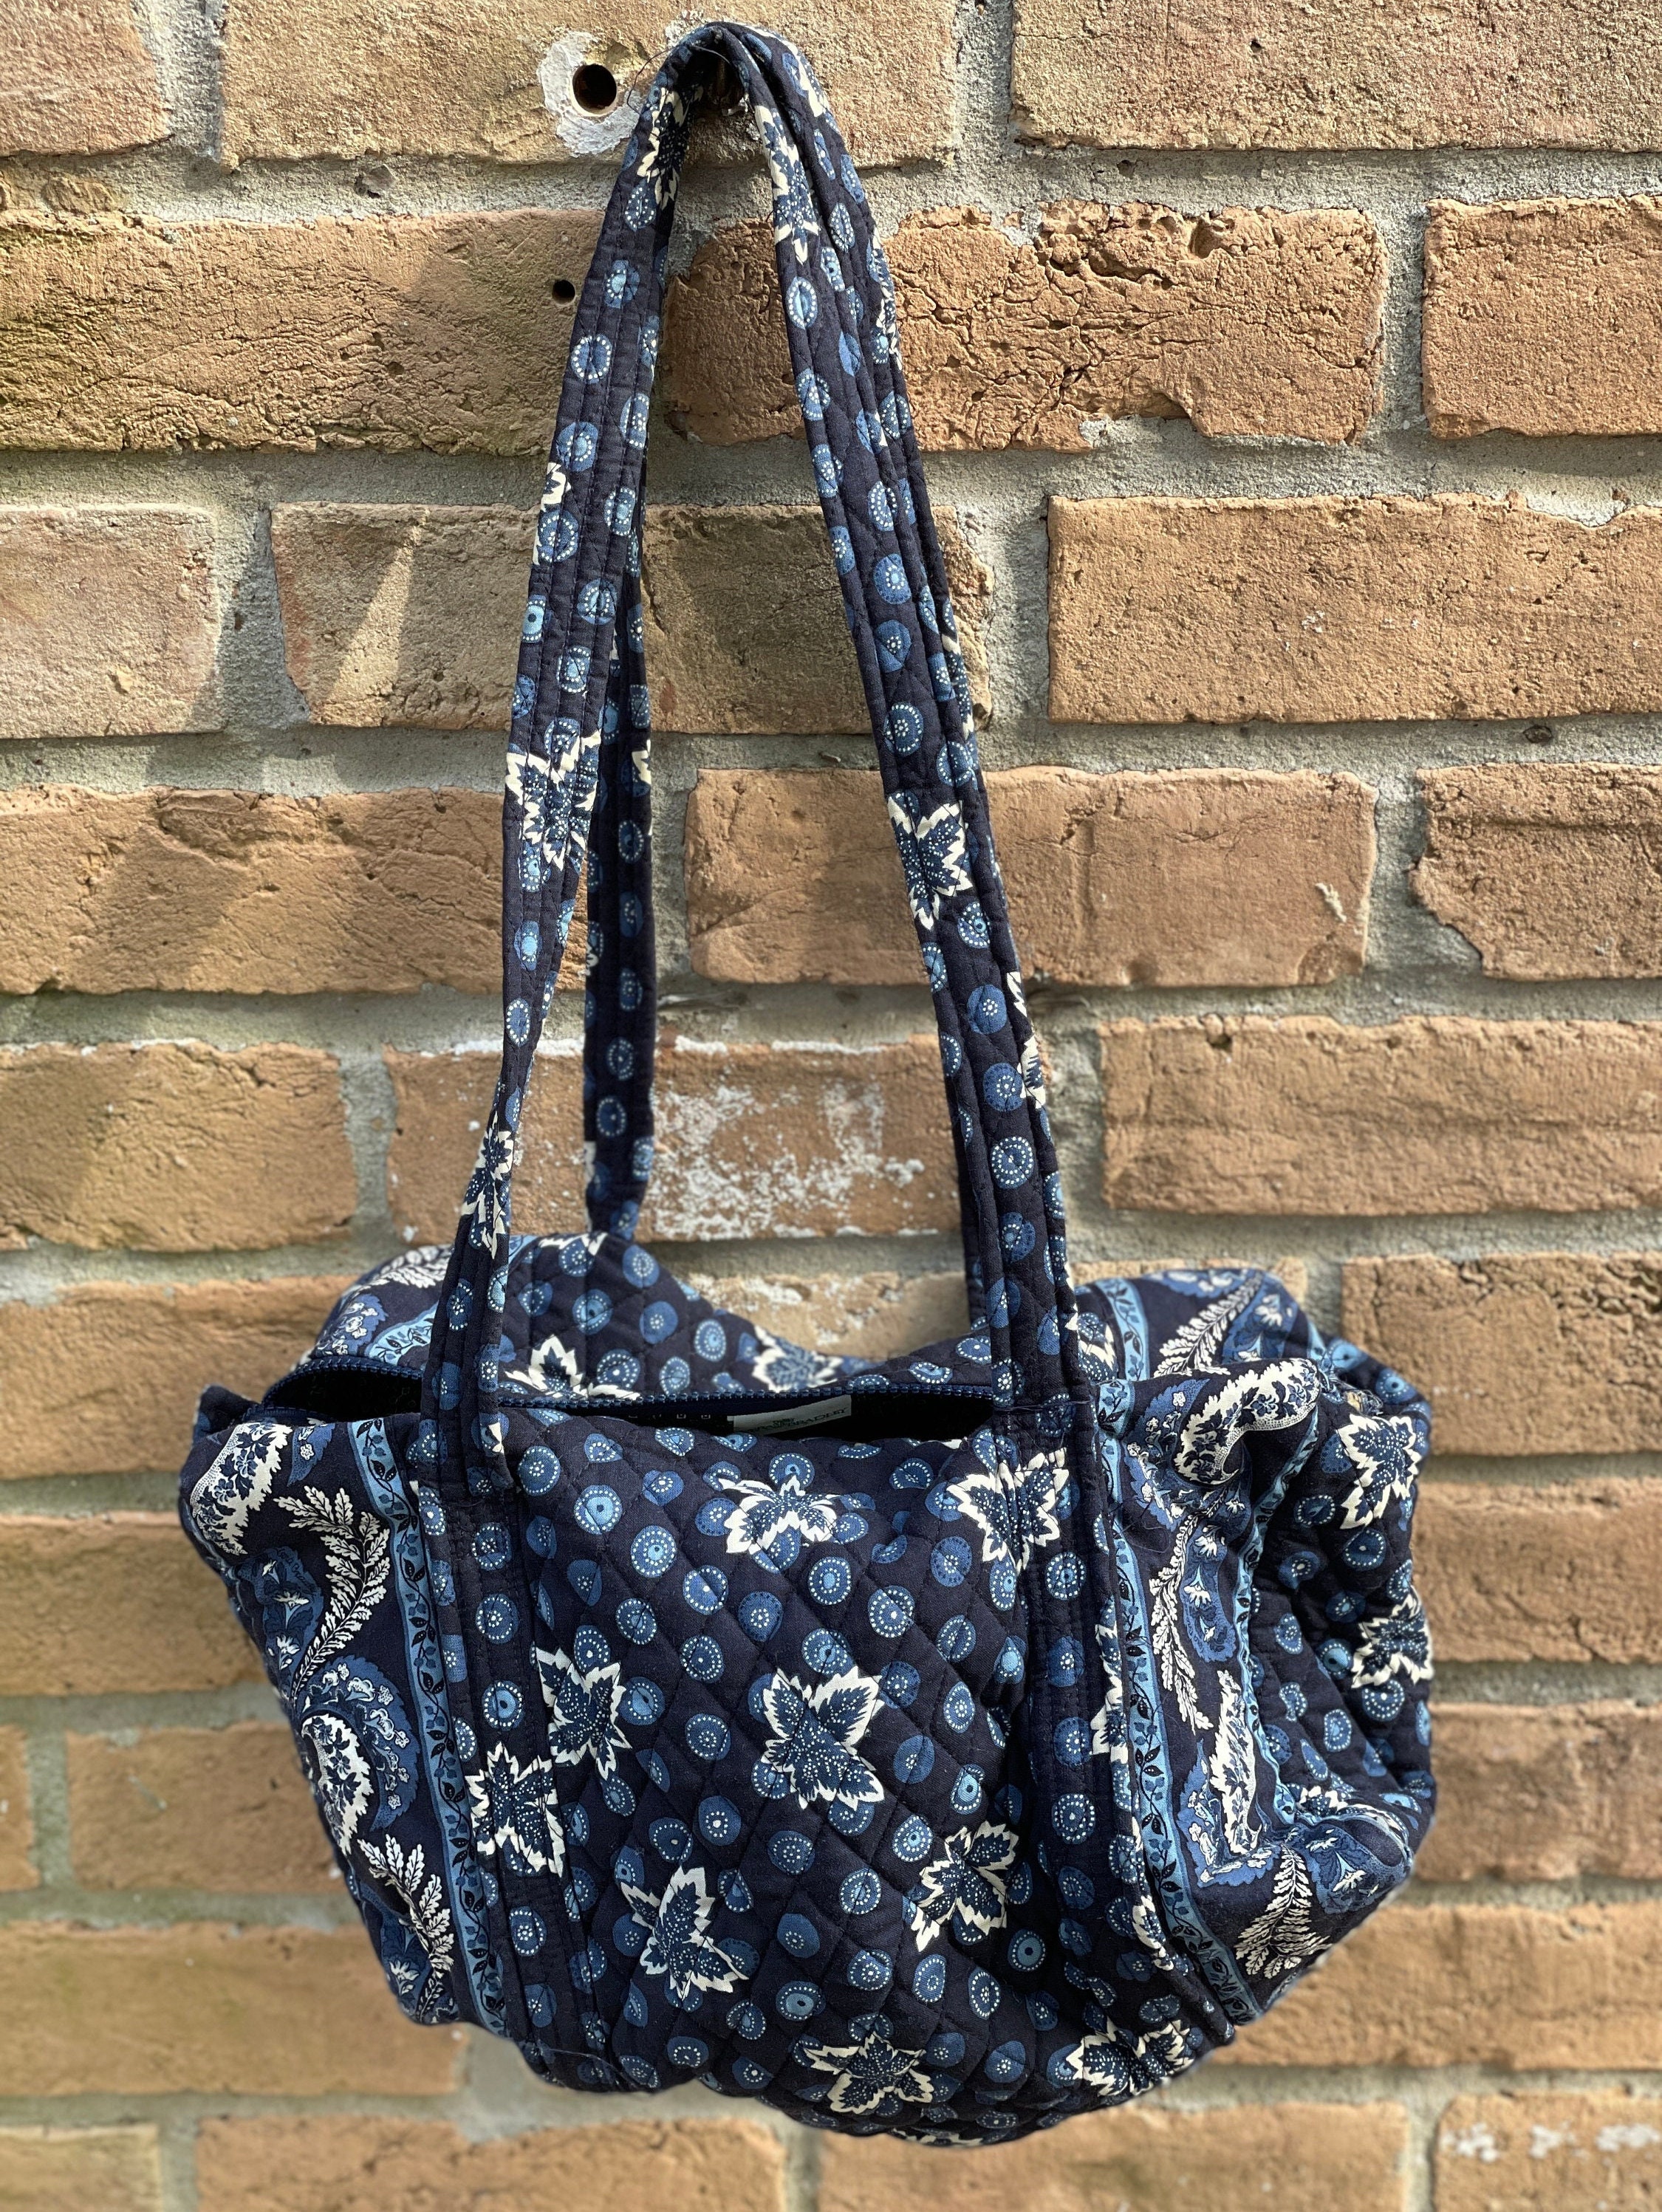 Vera Bradley Commuter Tote Bag in Rumba, Personalized, Monogram or Name,  Embroidered, Custom 